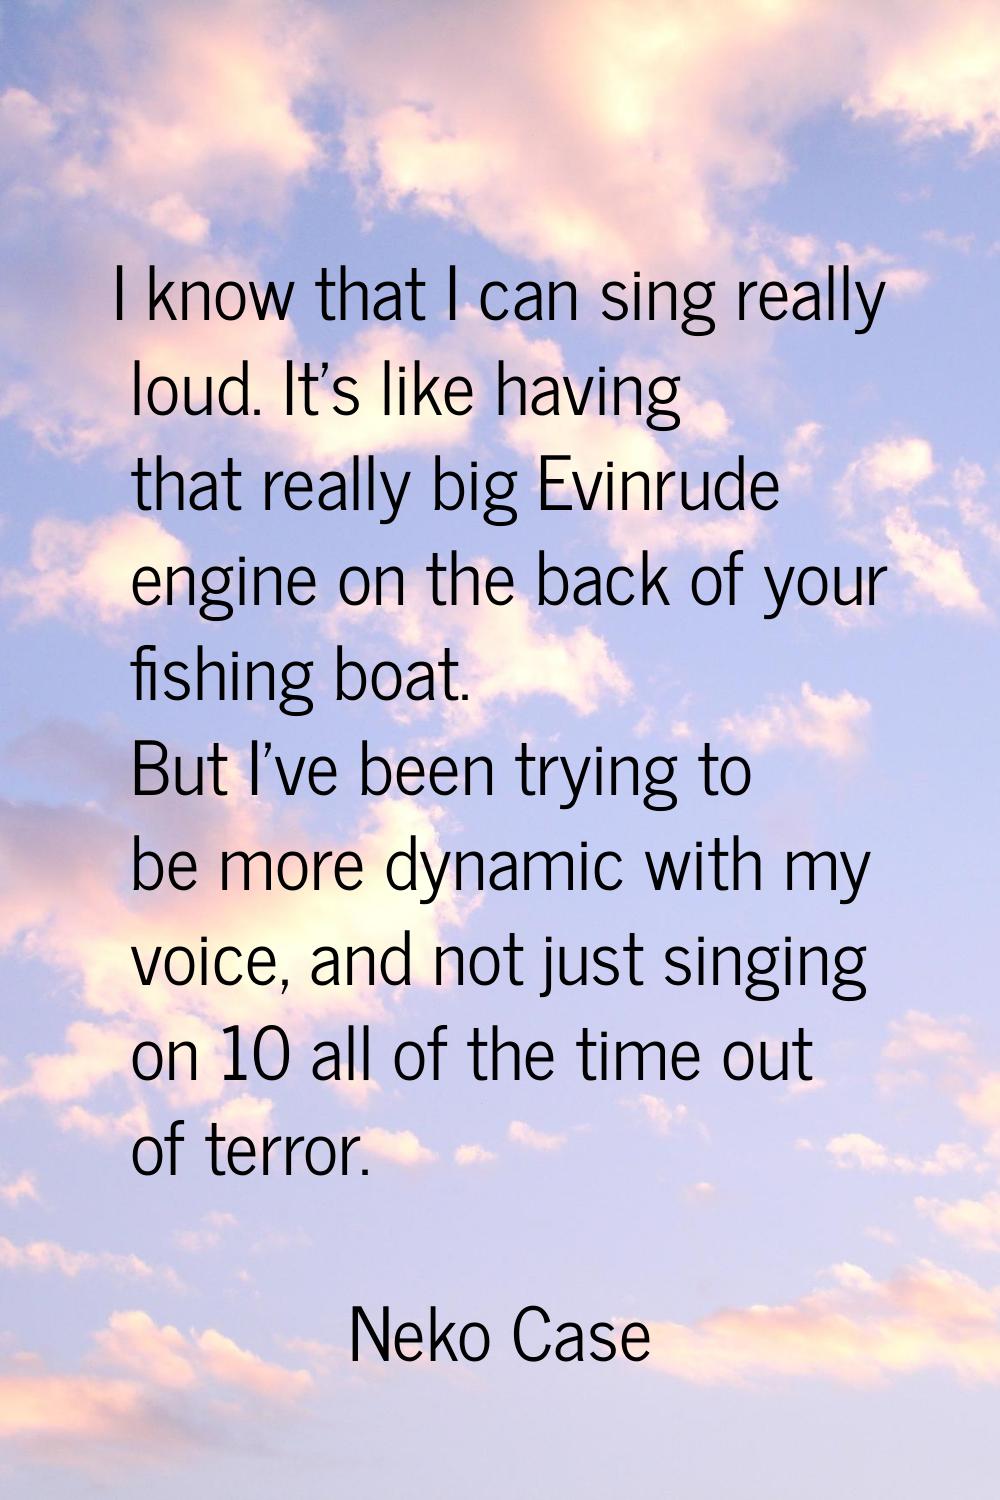 I know that I can sing really loud. It's like having that really big Evinrude engine on the back of